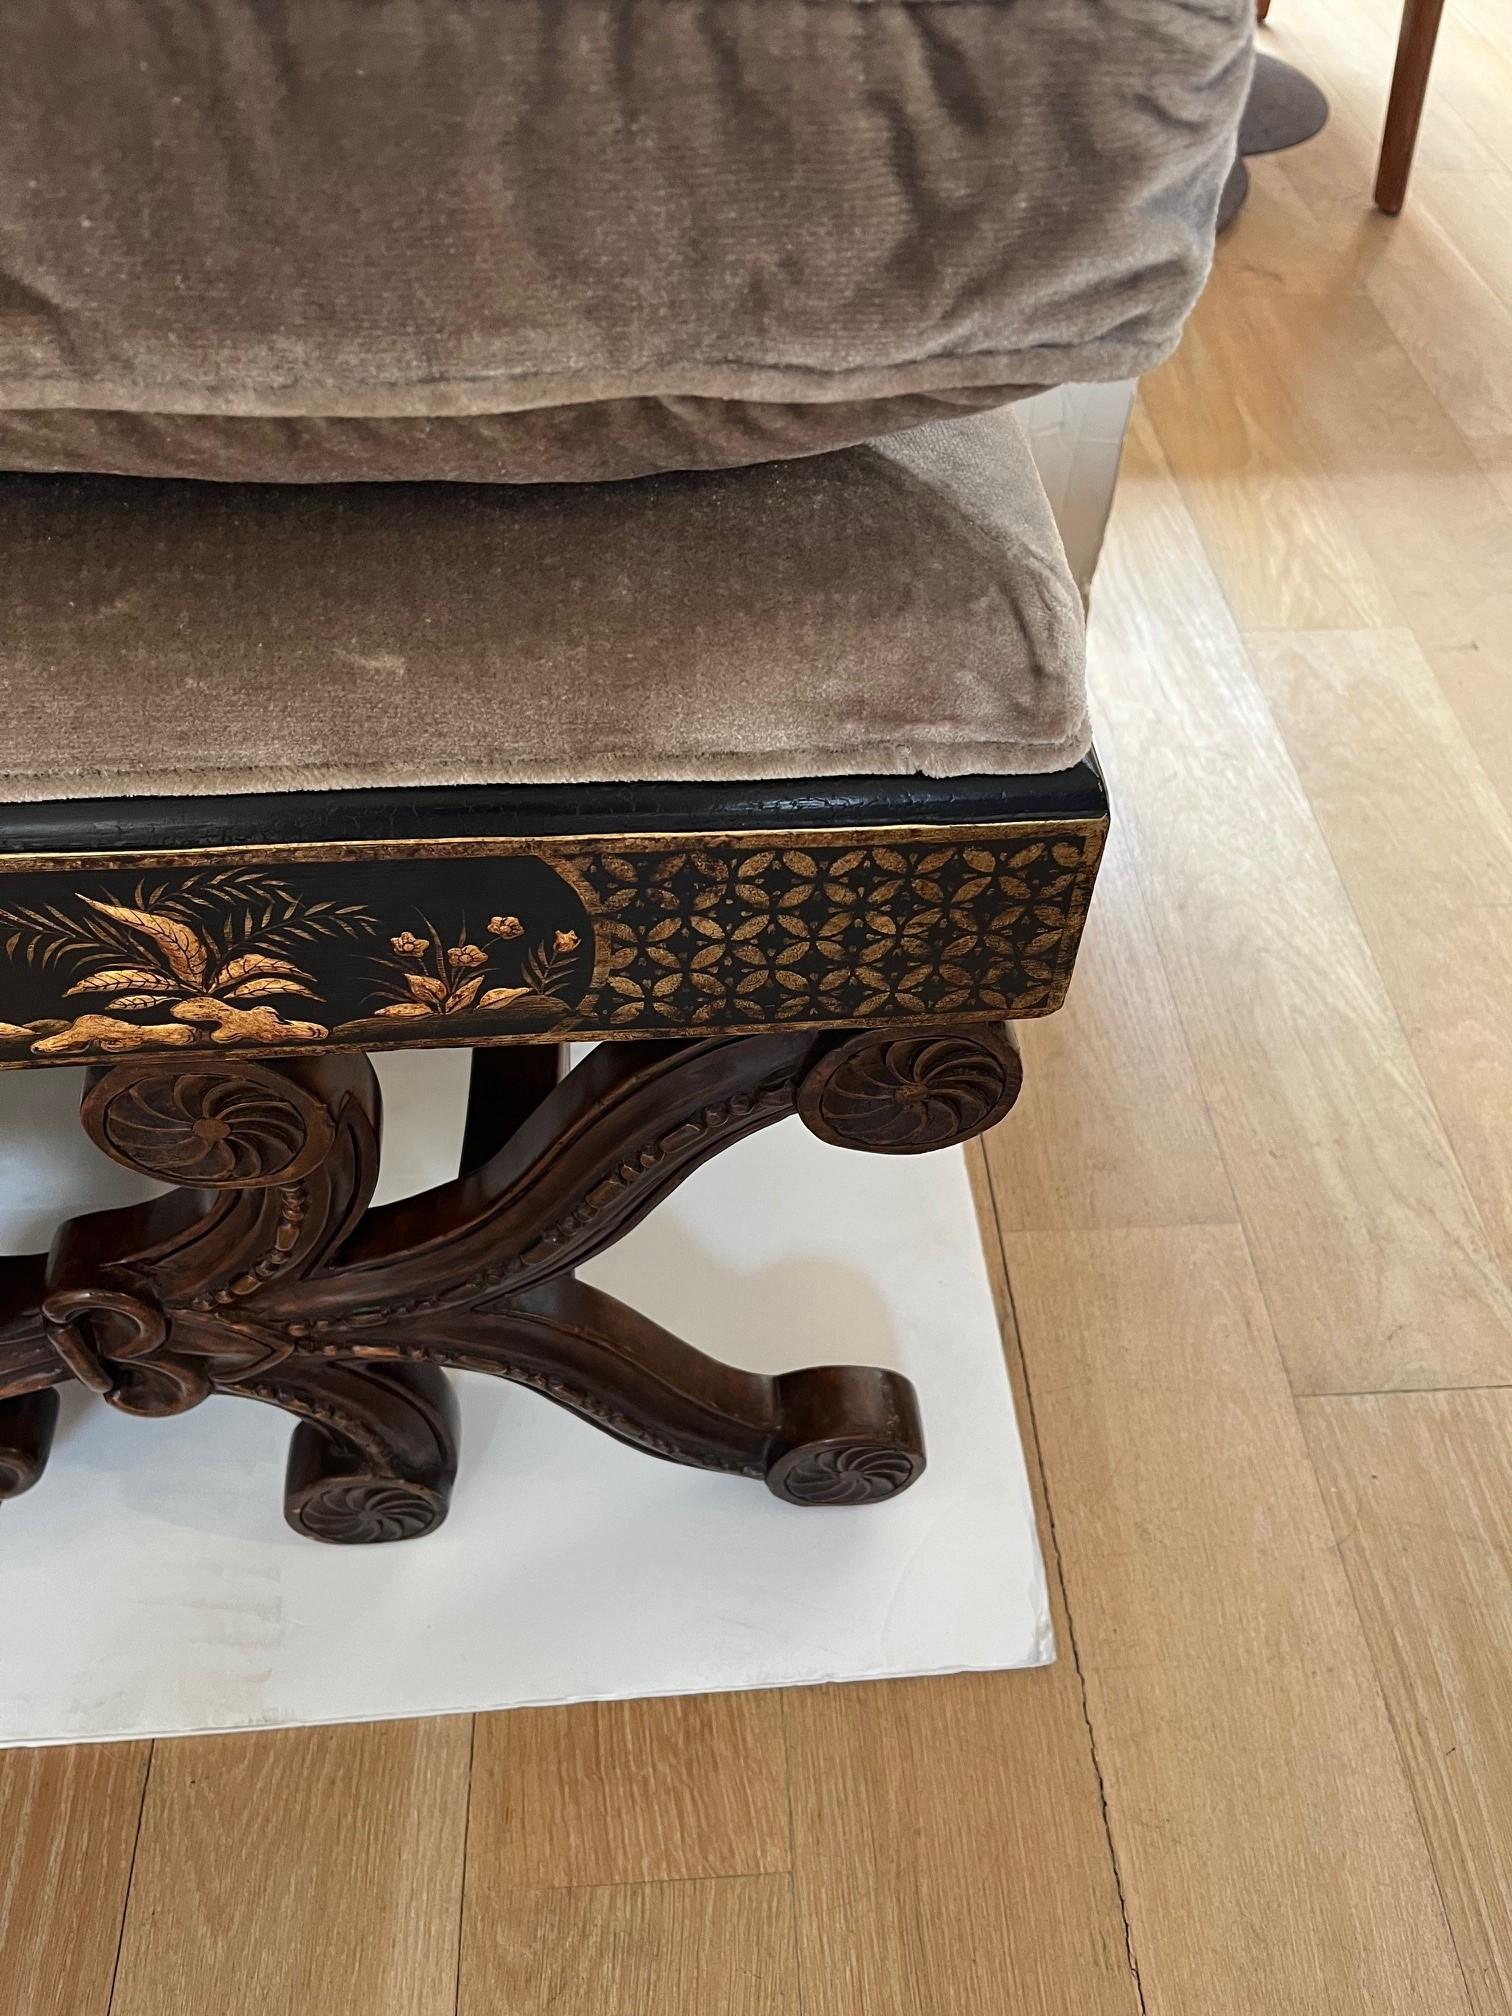 Made to Order 20-26 Chinoiserie Stool with 23kt Gold Raised Chinoiserie Detail For Sale 5